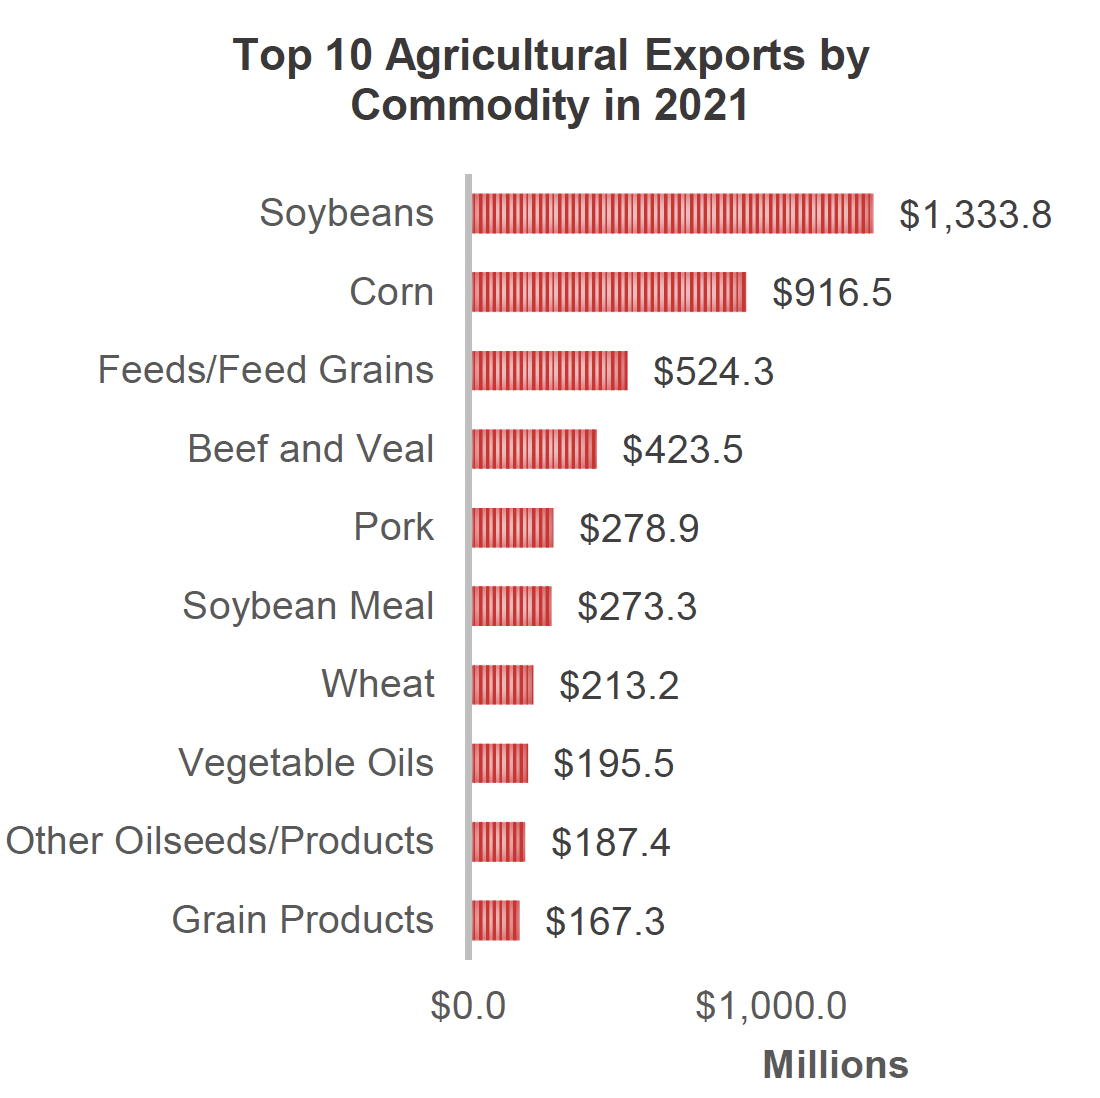 Top 10 Agricultural Exports by Commodity in 2021